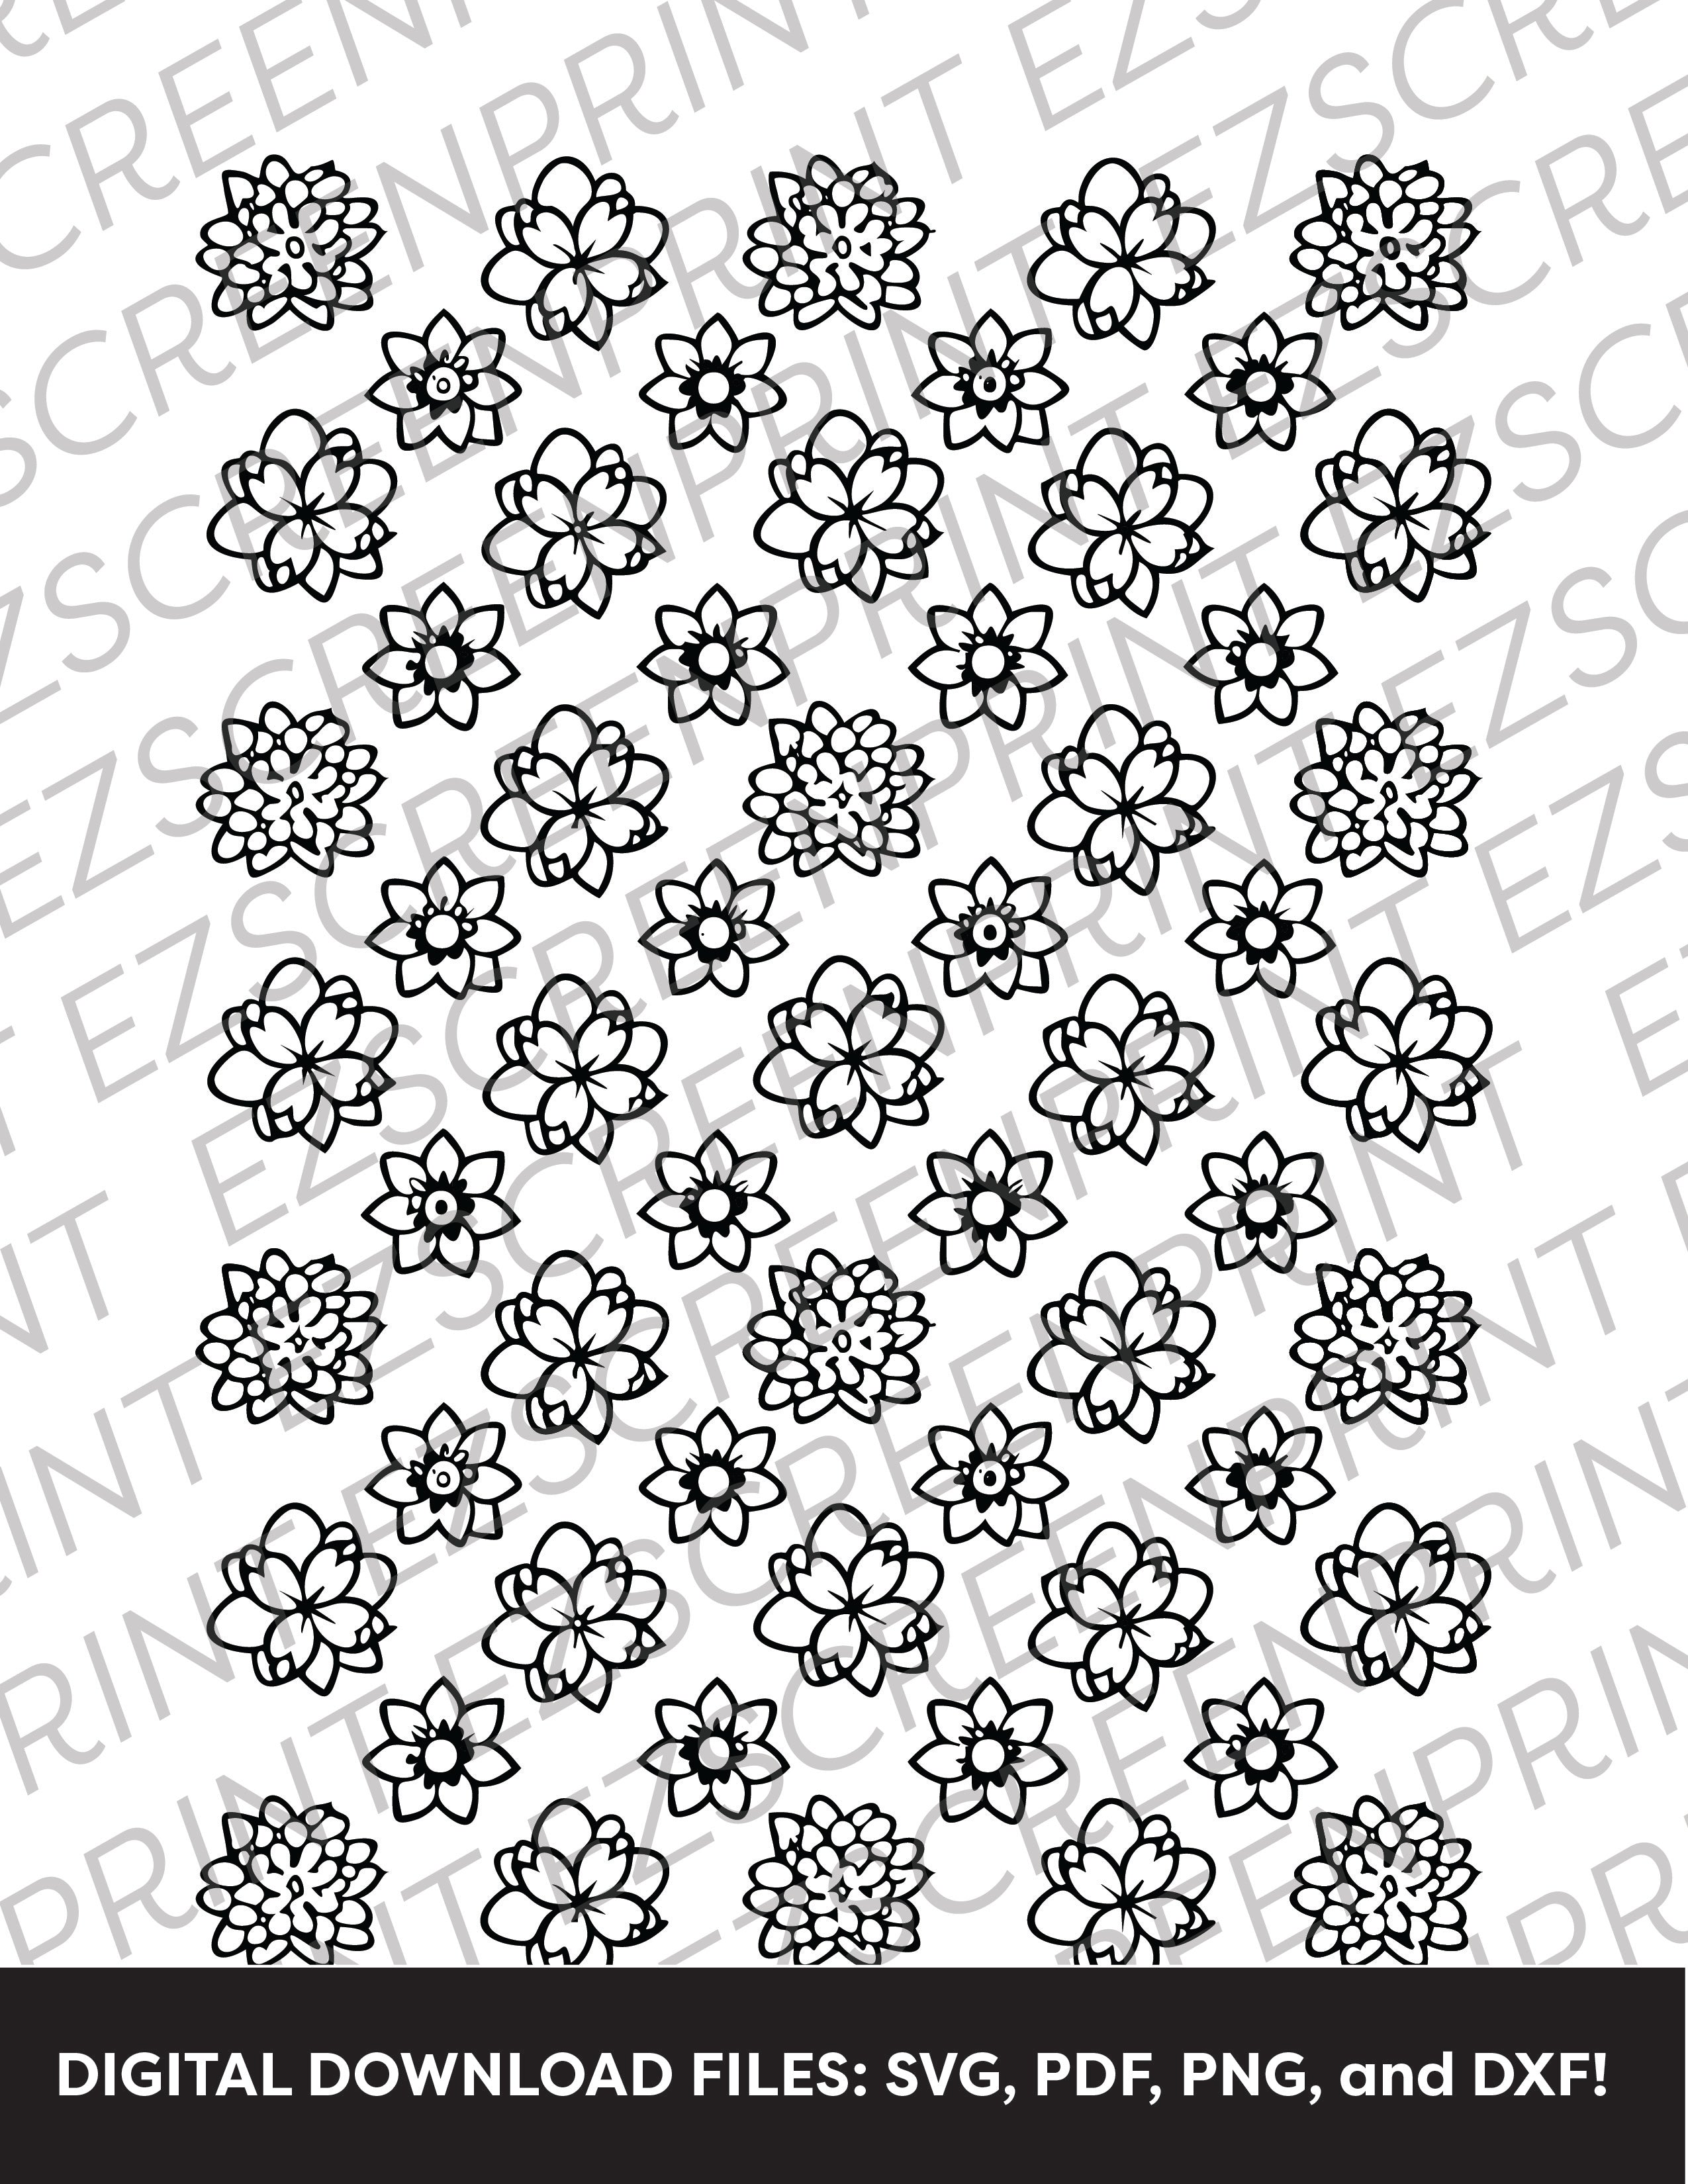 Variety Blossoms Pattern 1, Various Sizes + Digital Download